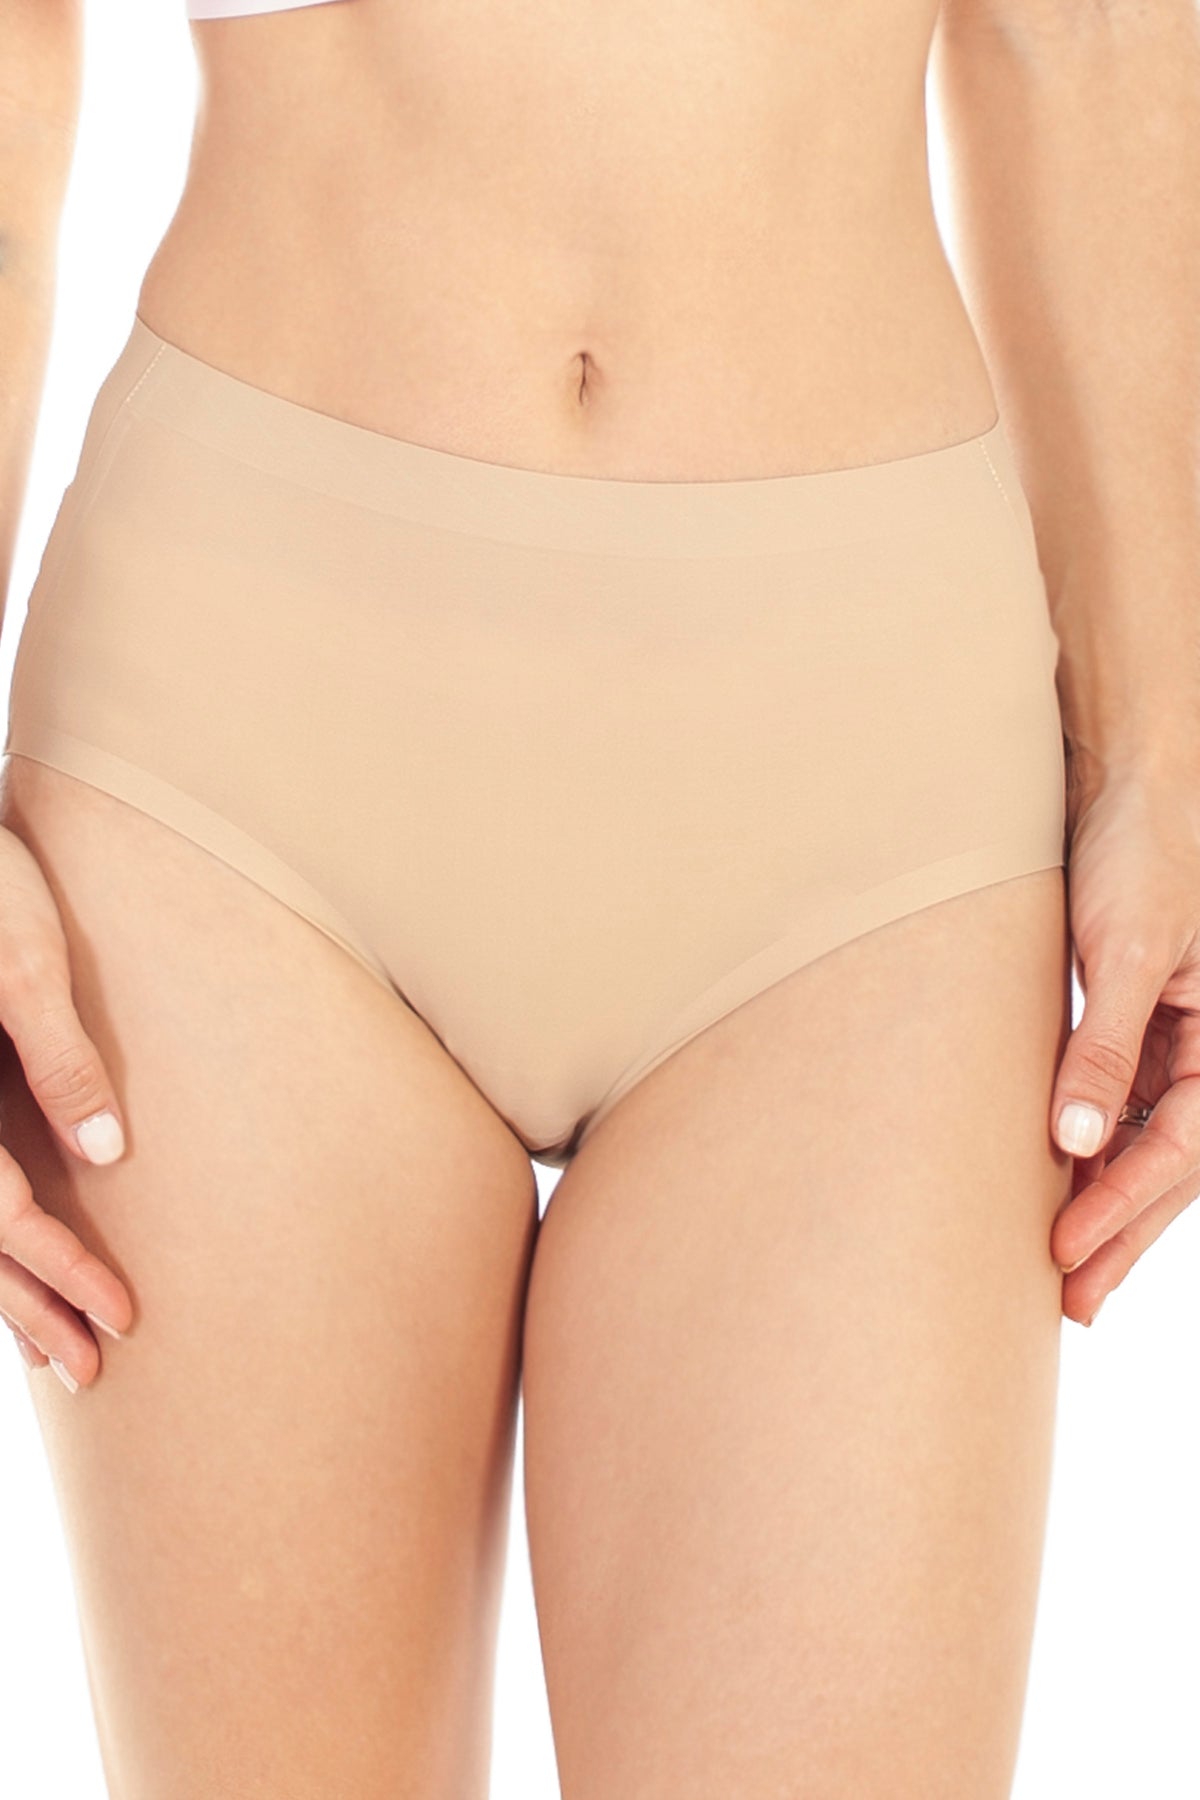 Opperiaya Women Antibacterial Briefs, Invisible Mid-rise